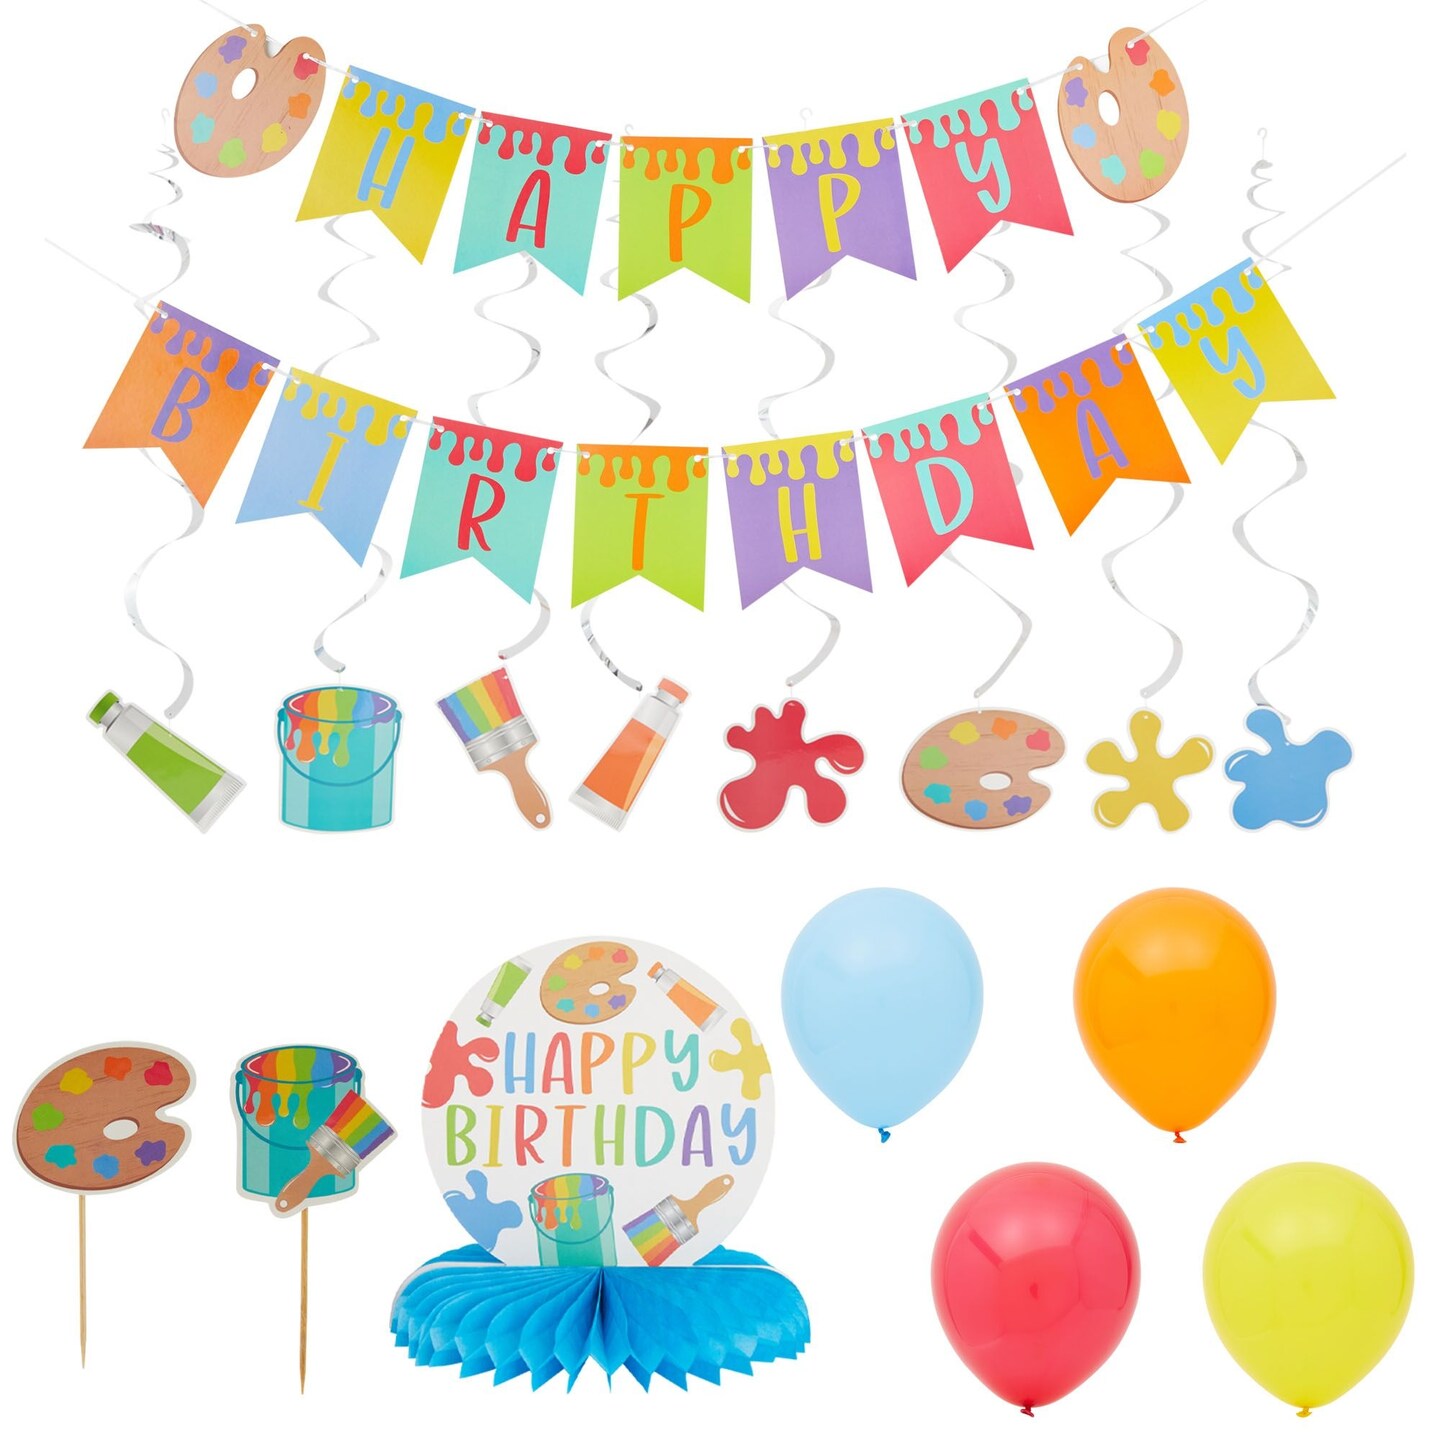  Slime Happy Birthday Banner Slime Painting Banner Pennant for  Slime Birthday Party Art Theme Baby Shower Slime Party Decorations Art  Party Supplies : Toys & Games